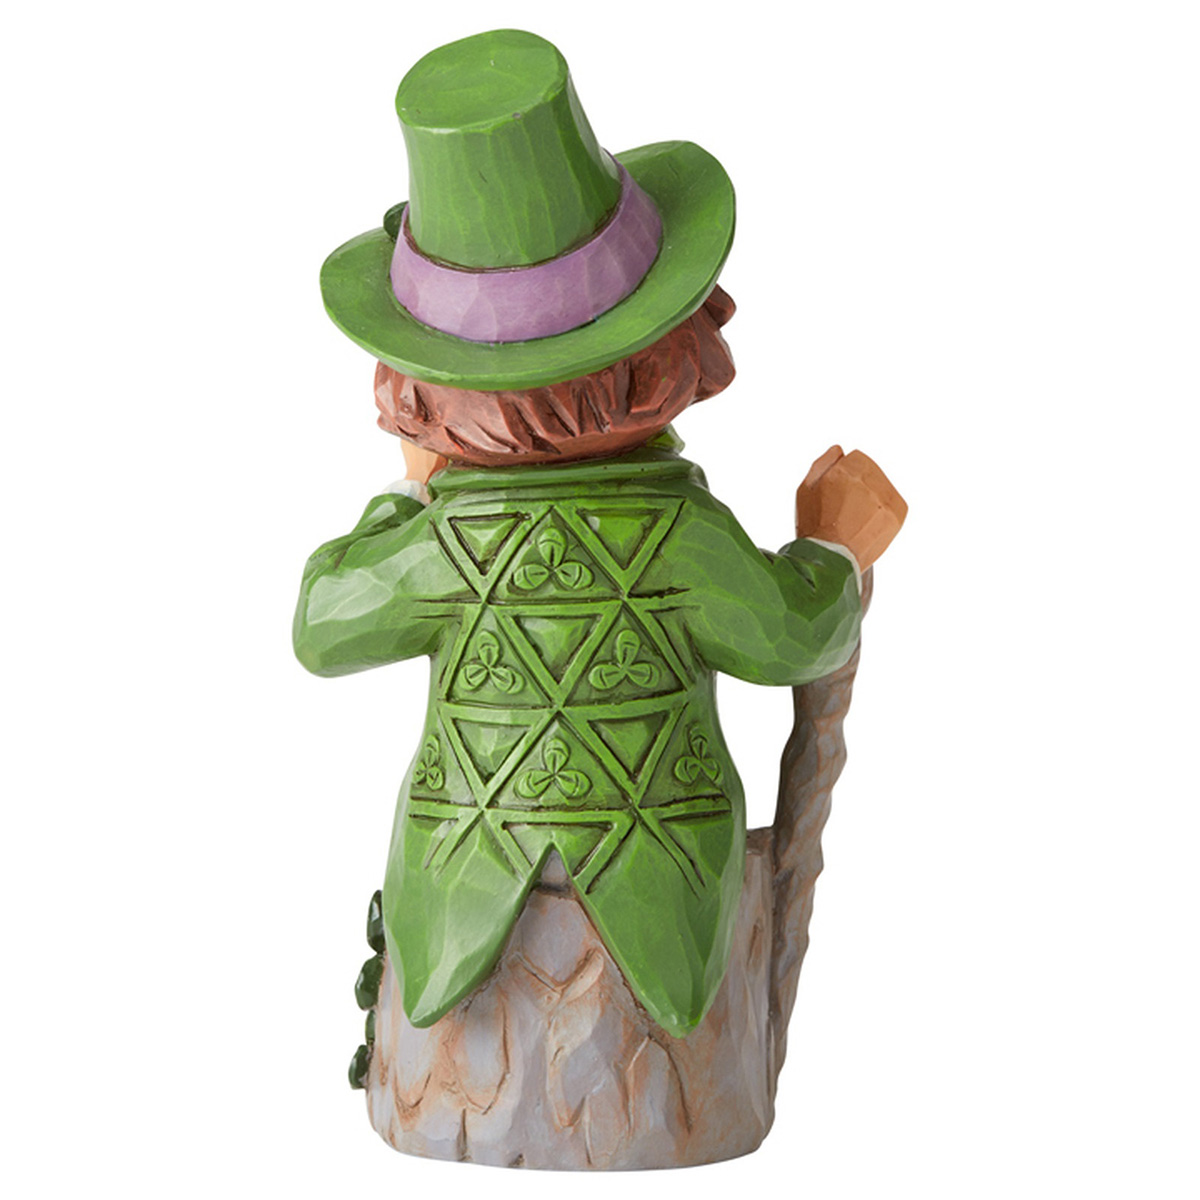 Product image for Irish Christmas | Luck Is What You Make It Leprechaun Figurine by Jim Shore